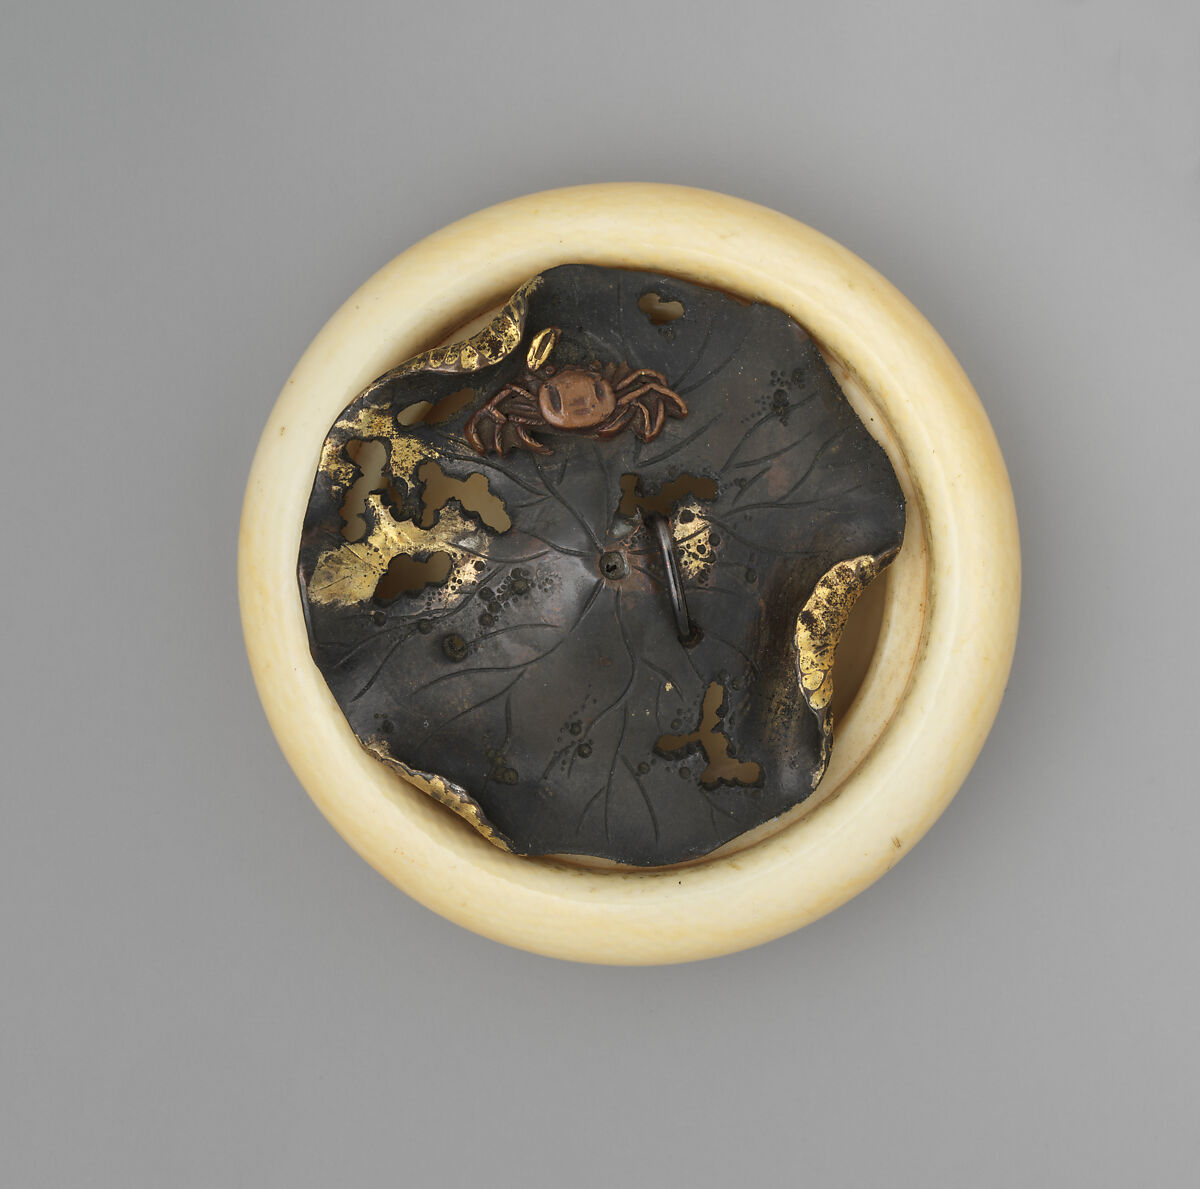 Netsuke in the Shape of Crab on a Lotus Leaf